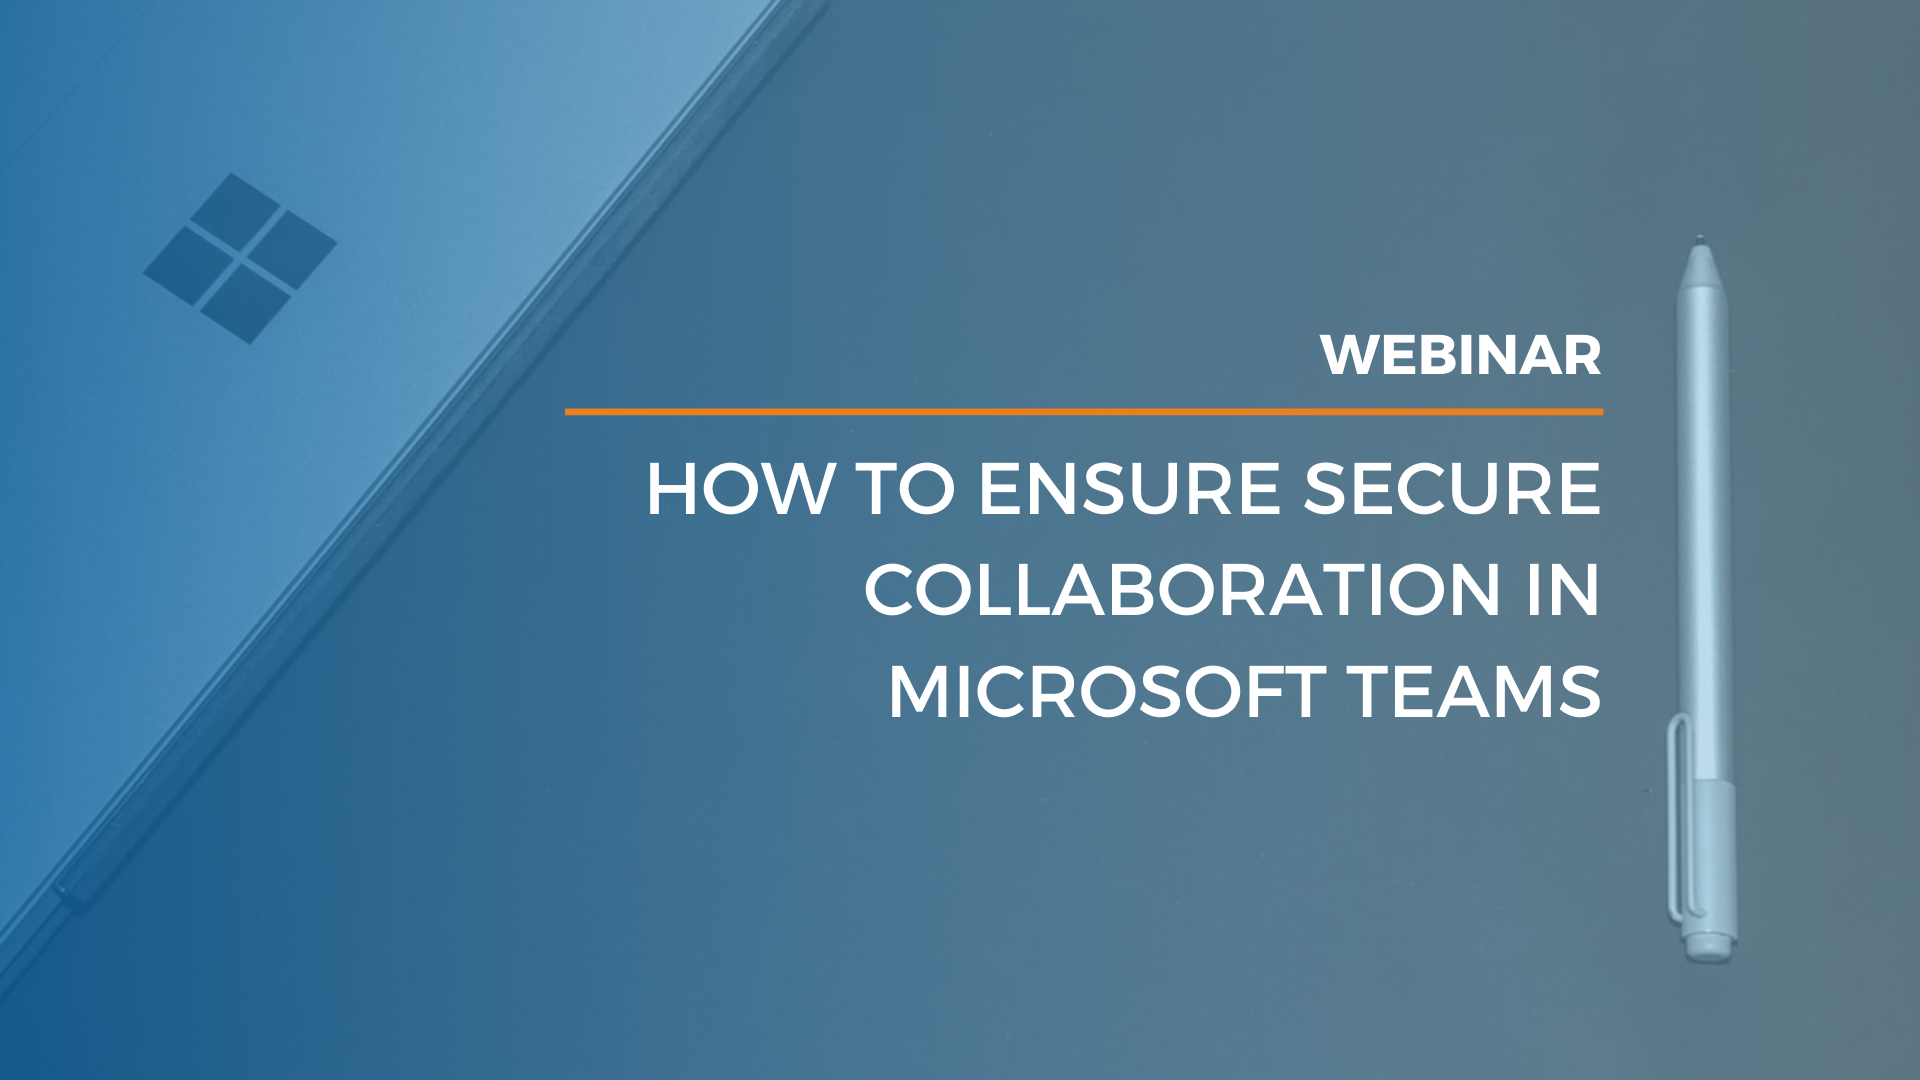 How To Ensure Secure Collaboration In Microsoft Teams